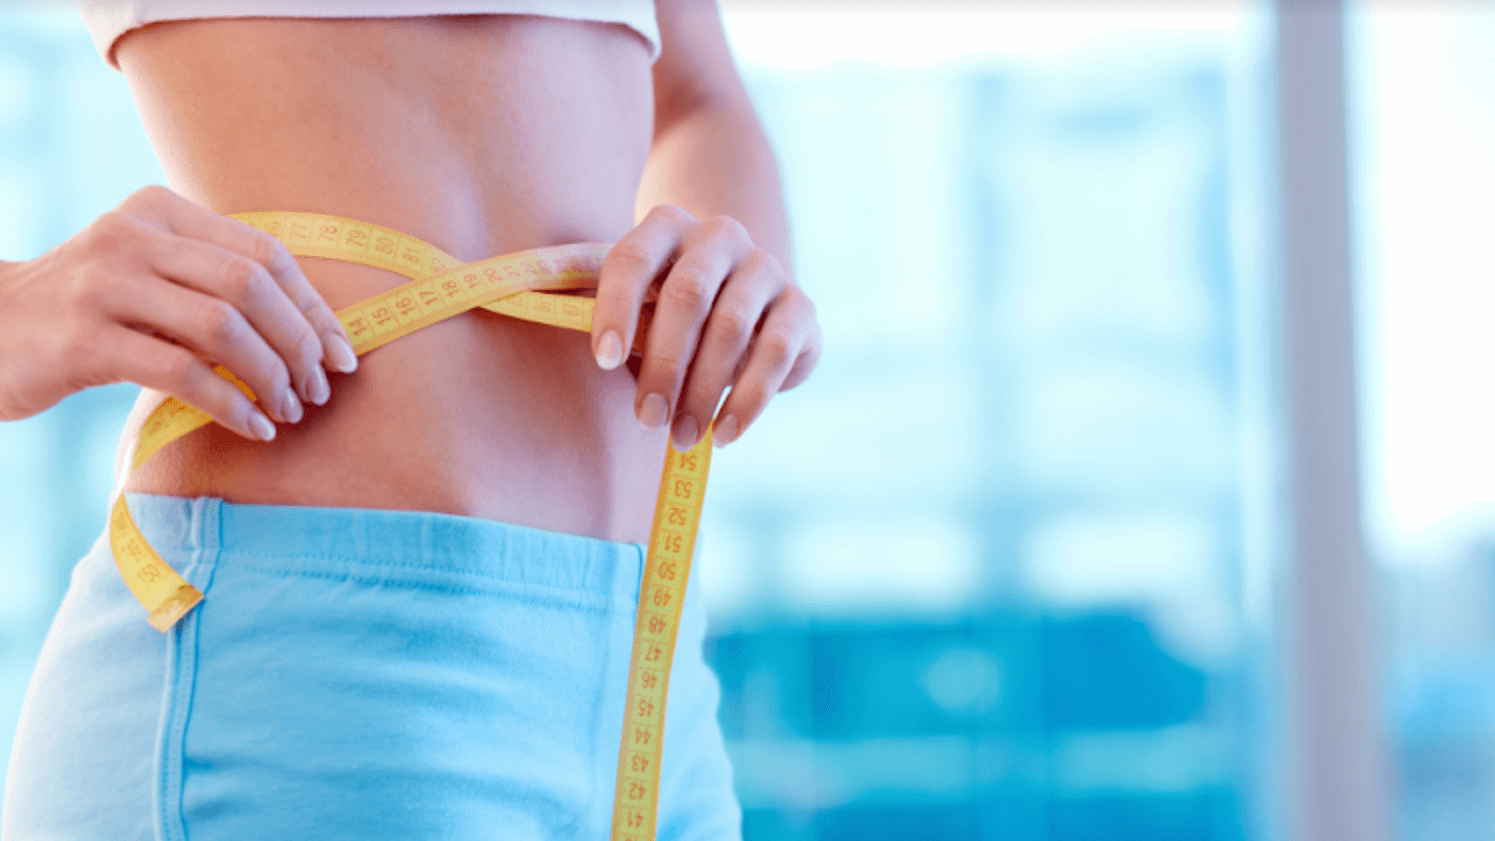 Will it be Easier to Lose Weight After Liposuction?